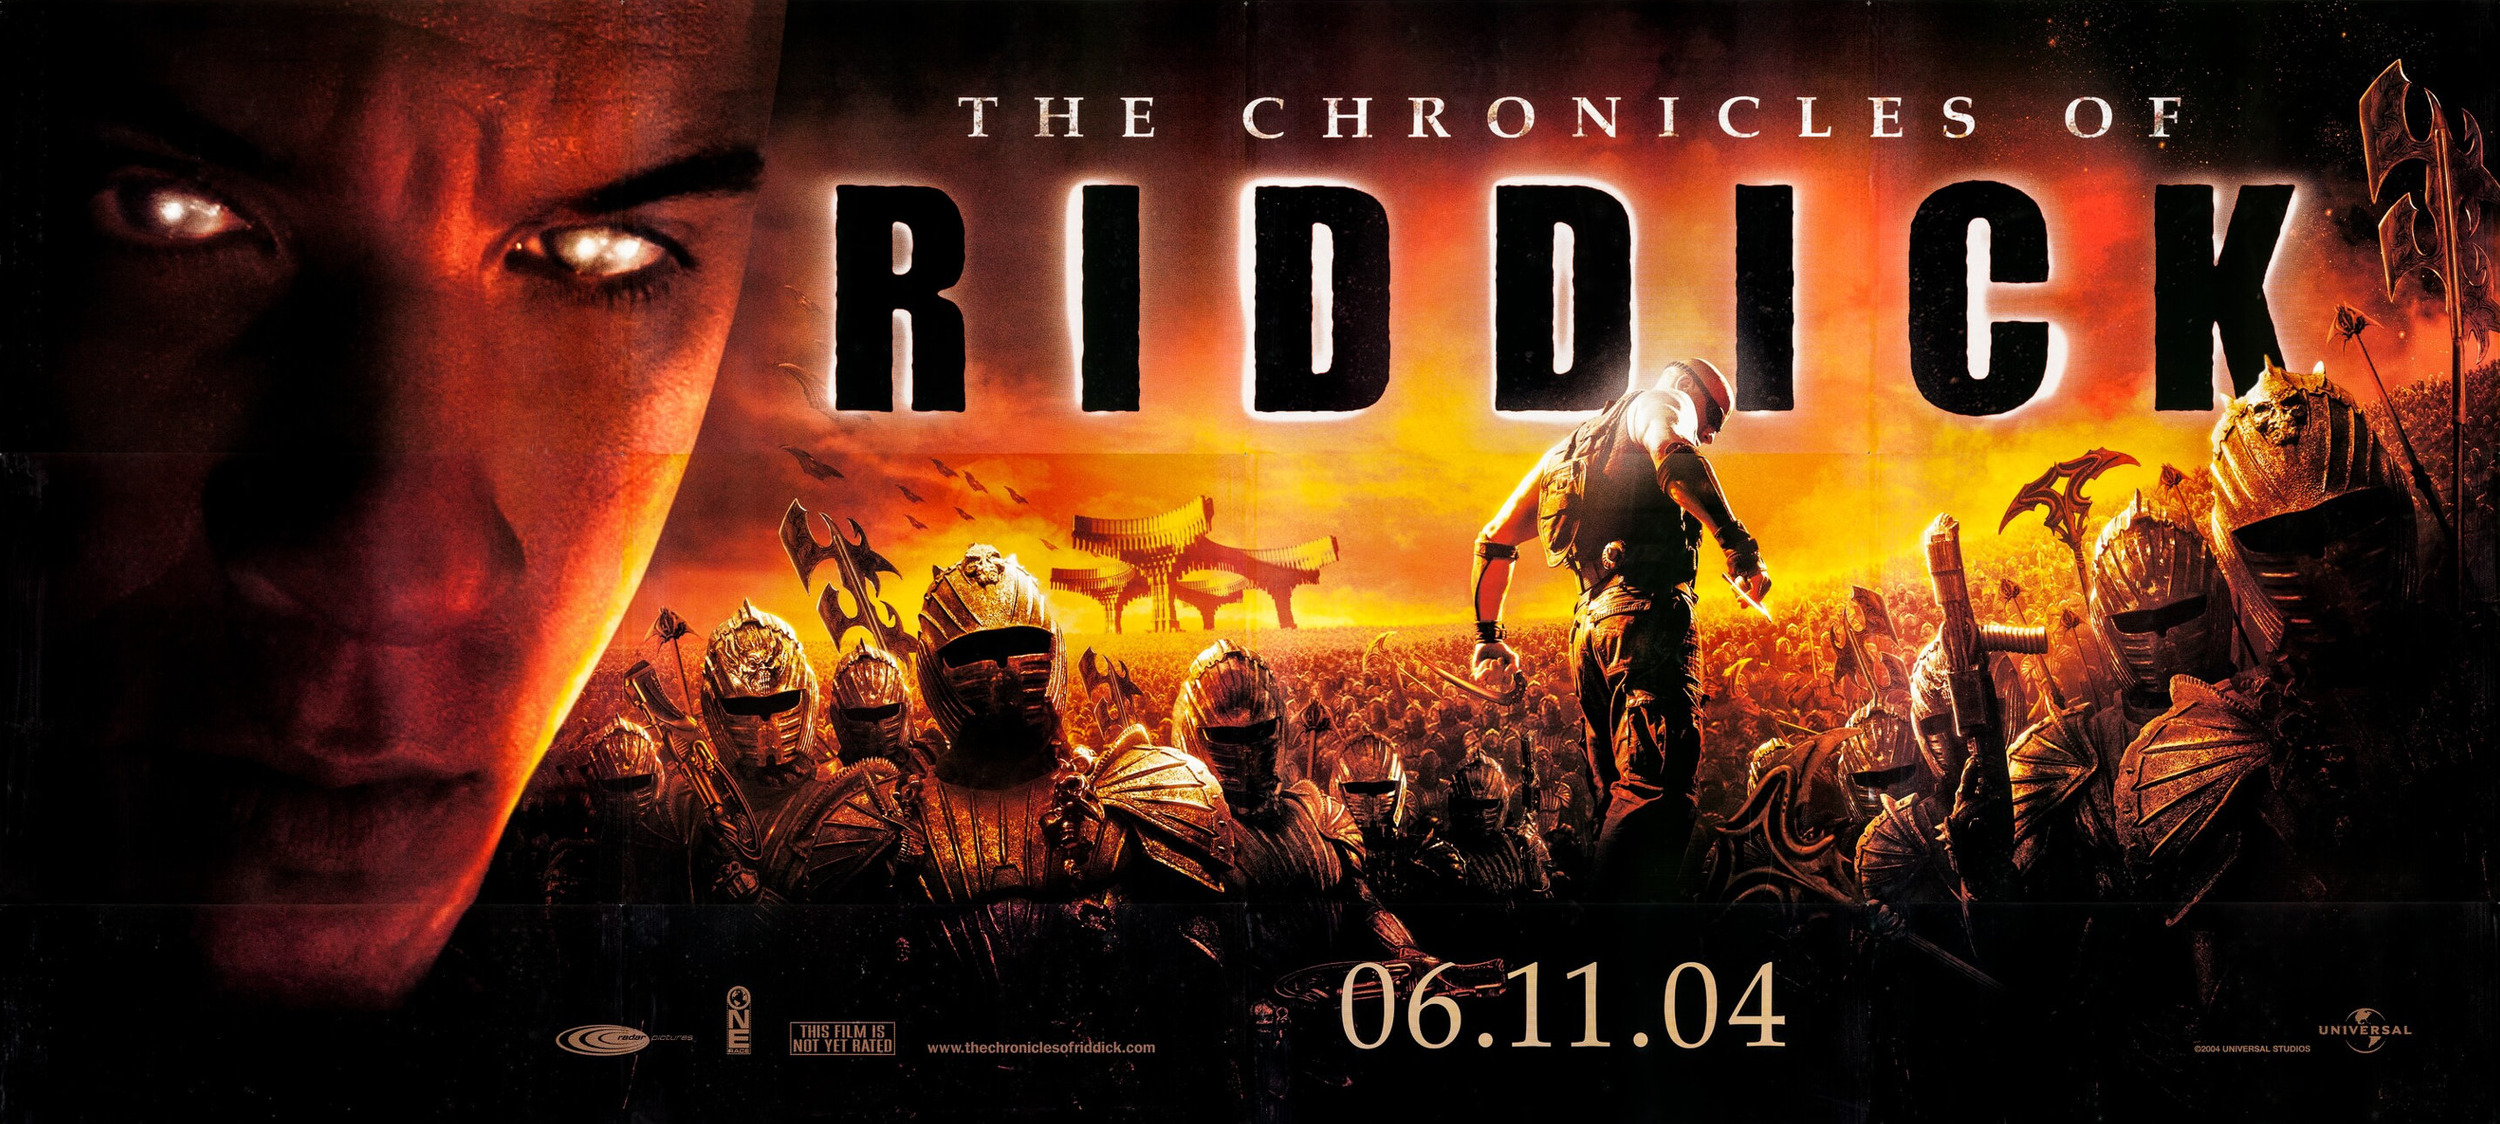 Mega Sized Movie Poster Image for The Chronicles of Riddick (#5 of 5)